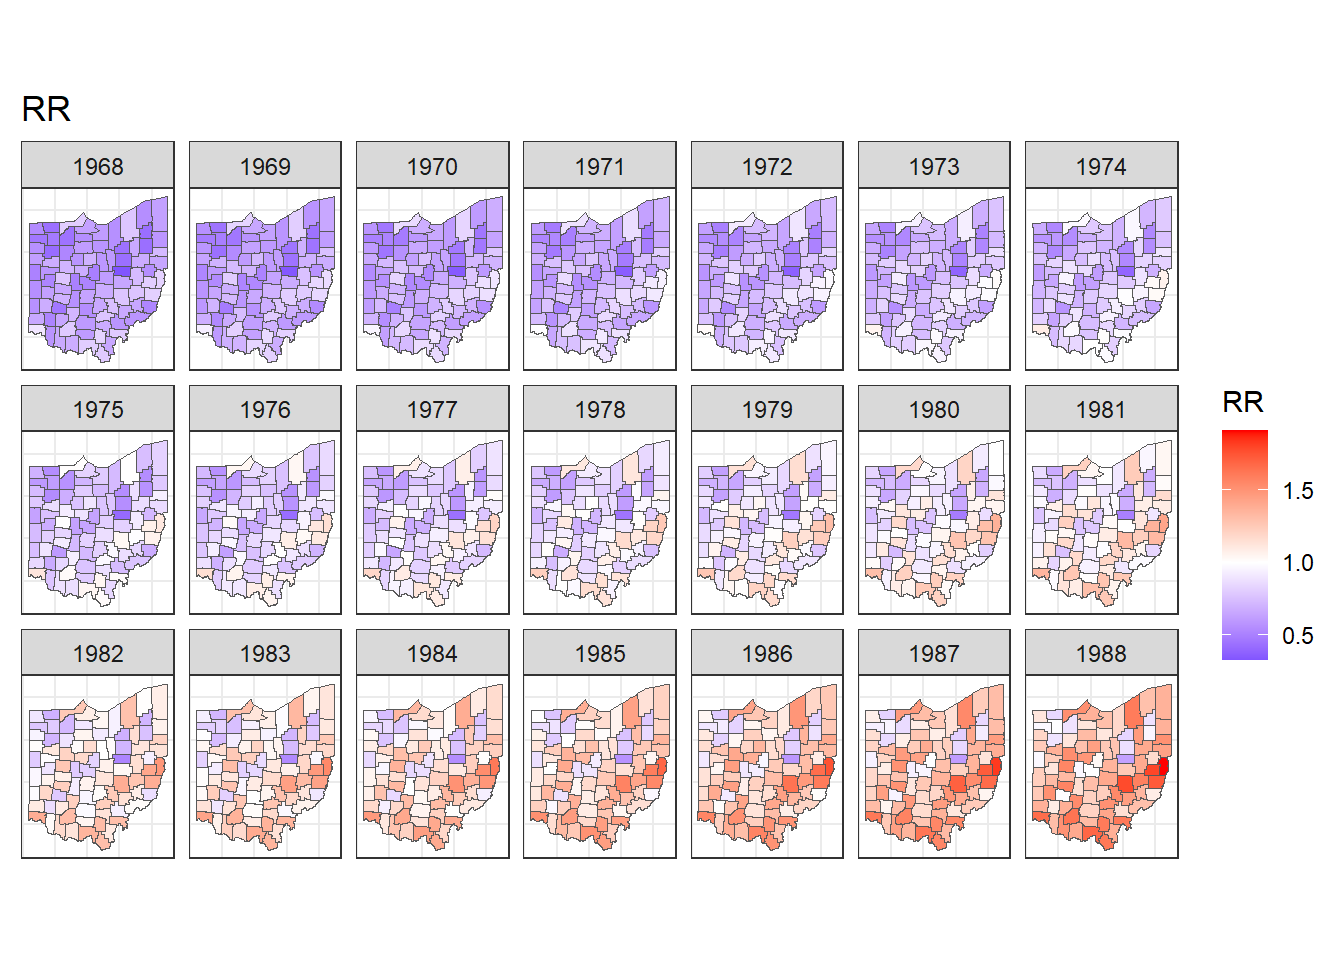 Maps of lung cancer relative risk in Ohio counties from 1968 to 1988.